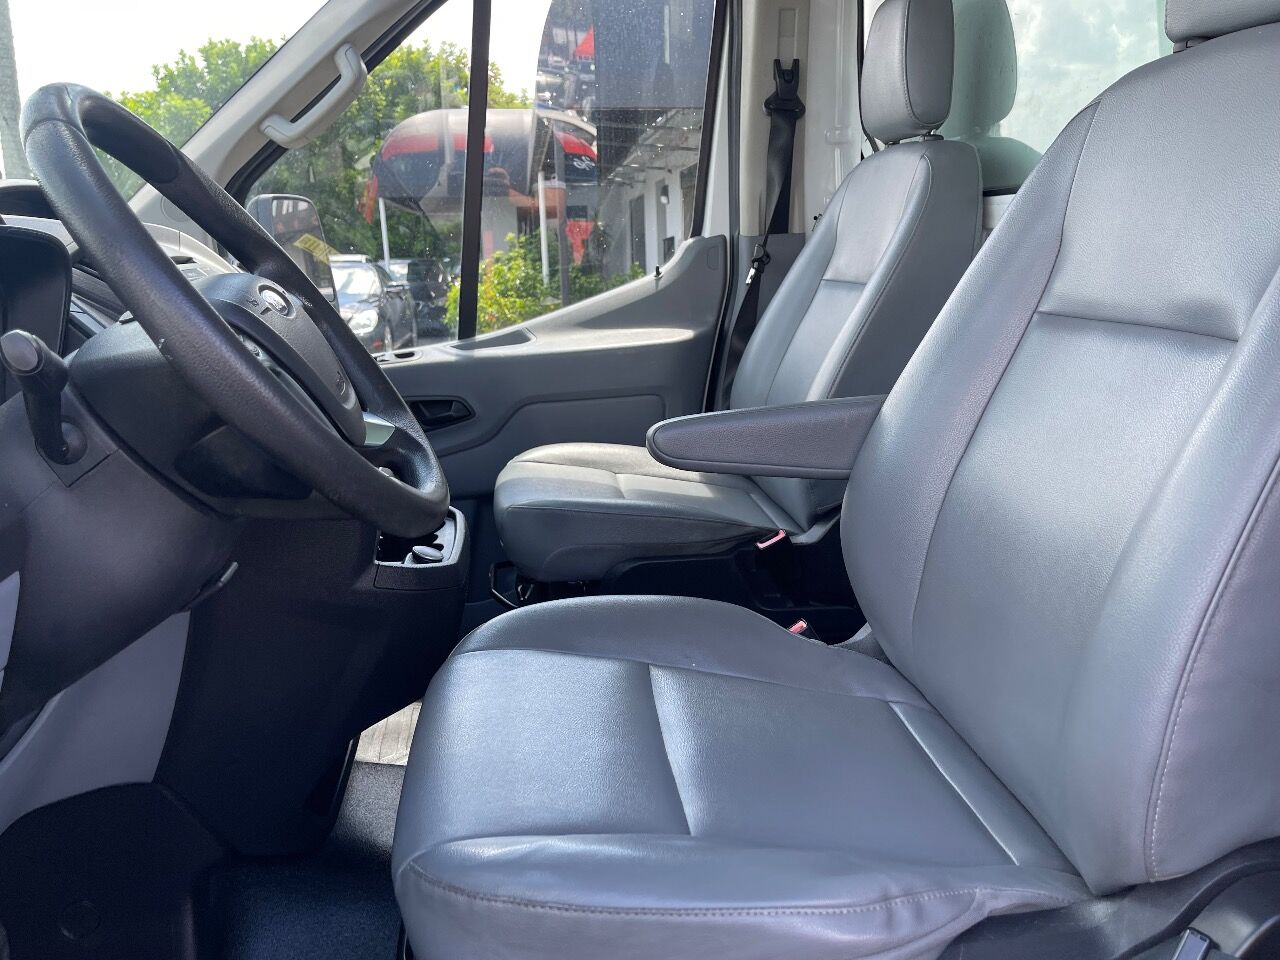 2018 FORD Transit Incomplete - $25,900